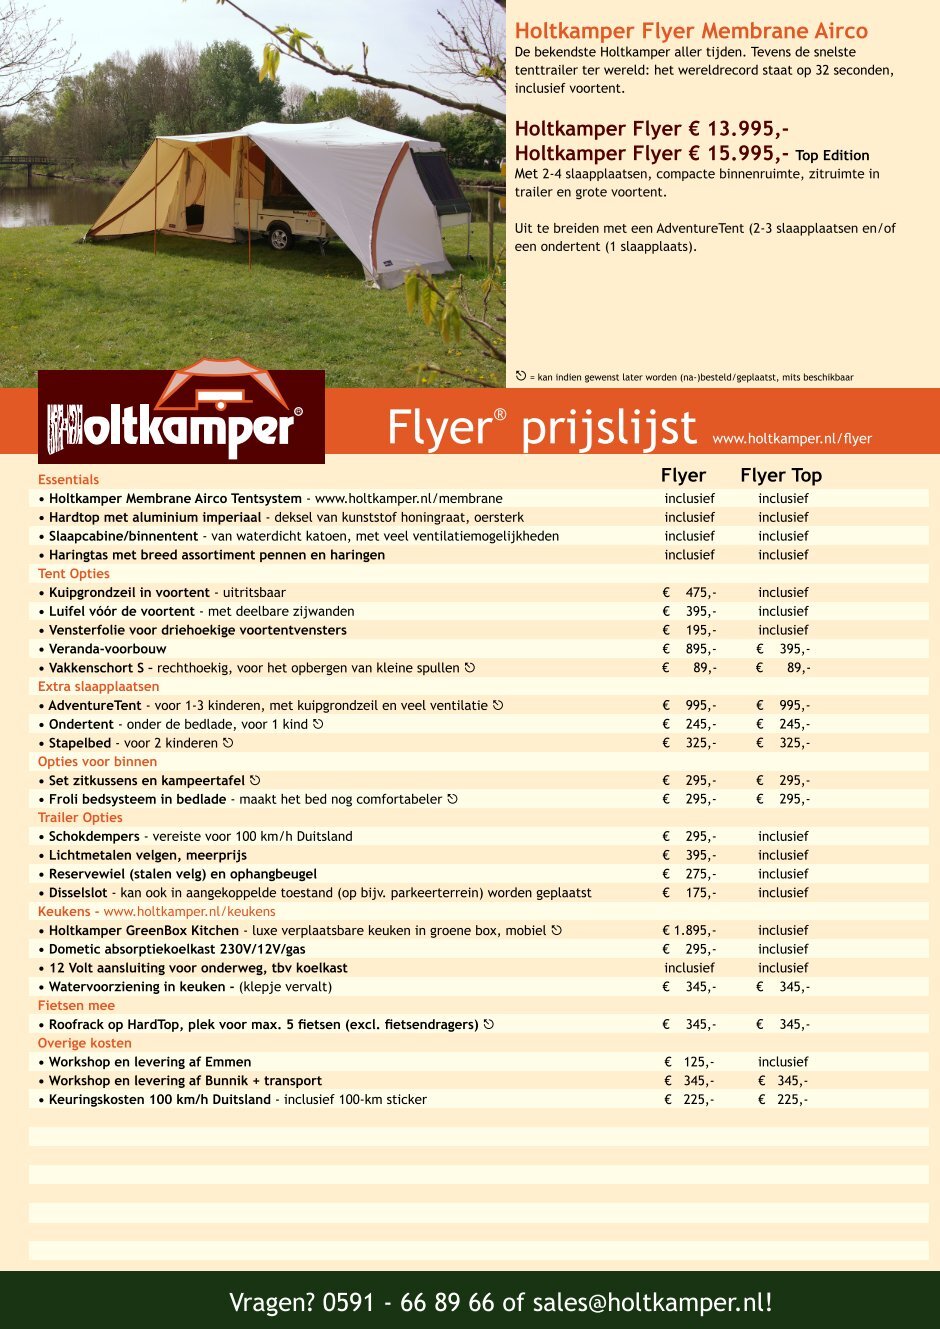 7 free Magazines from HOLTKAMPER.NL